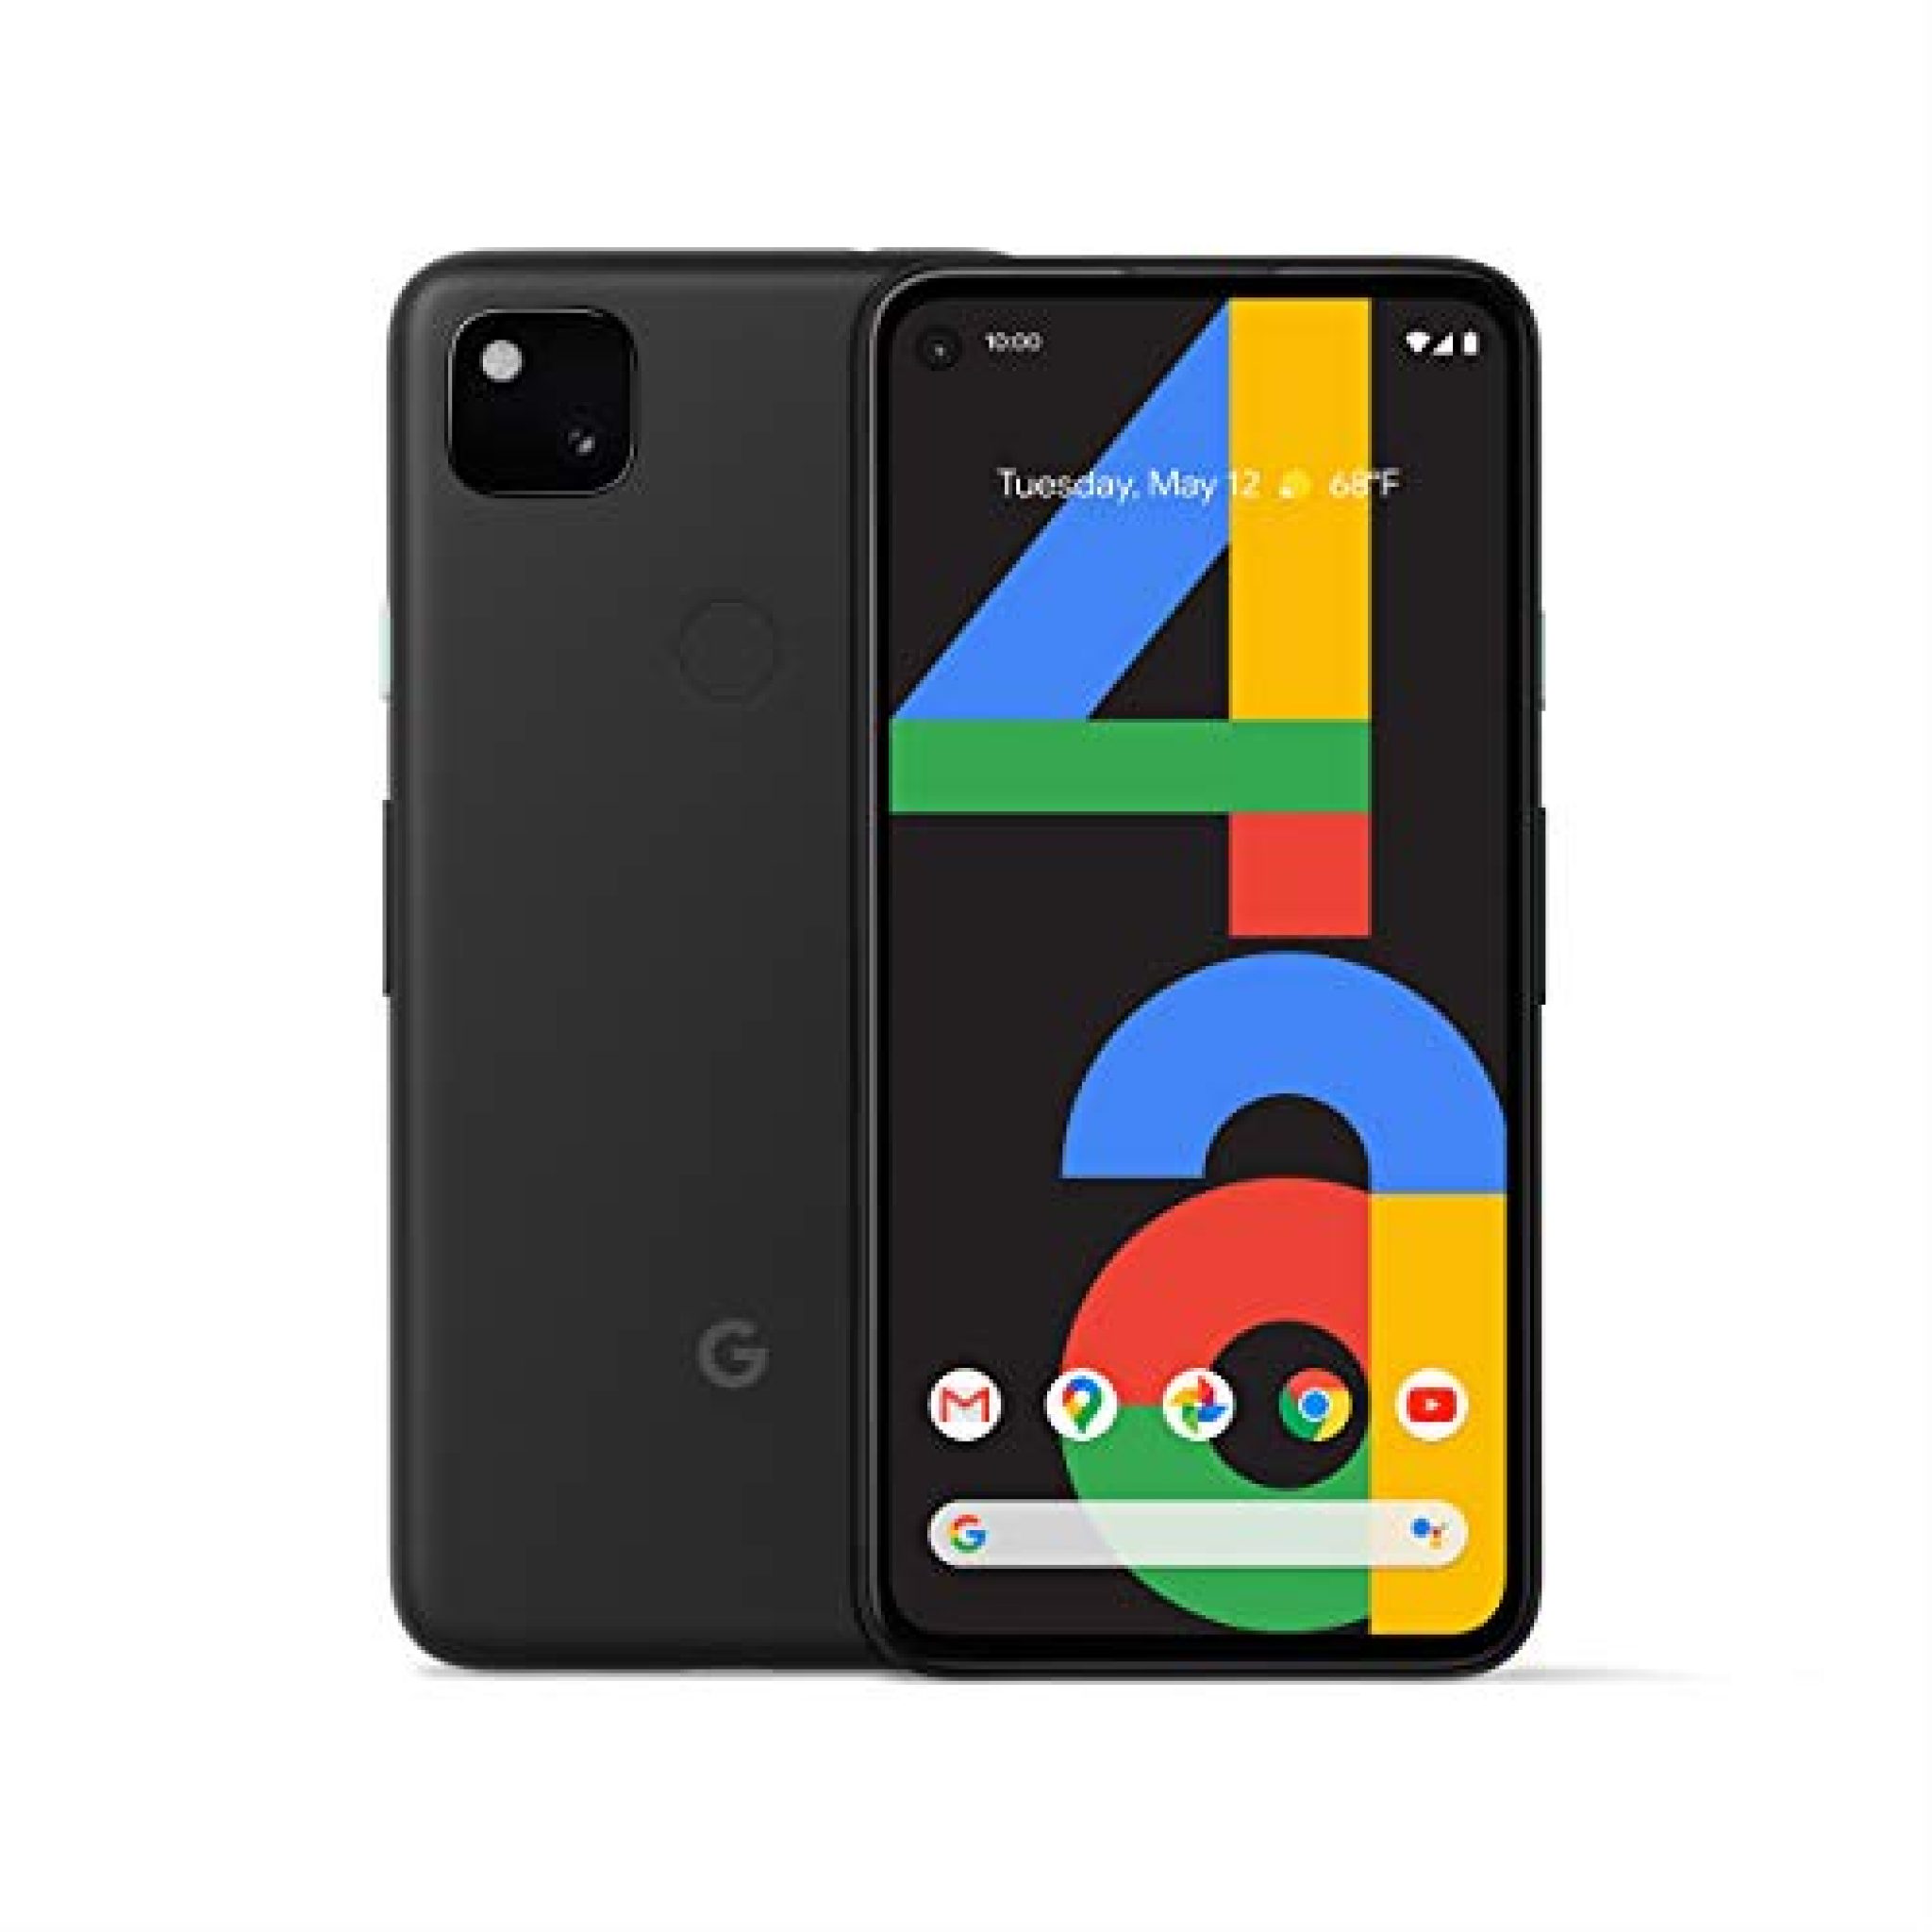 Google Pixel 4a – New Unlocked Android Smartphone – 128 GB of Storage